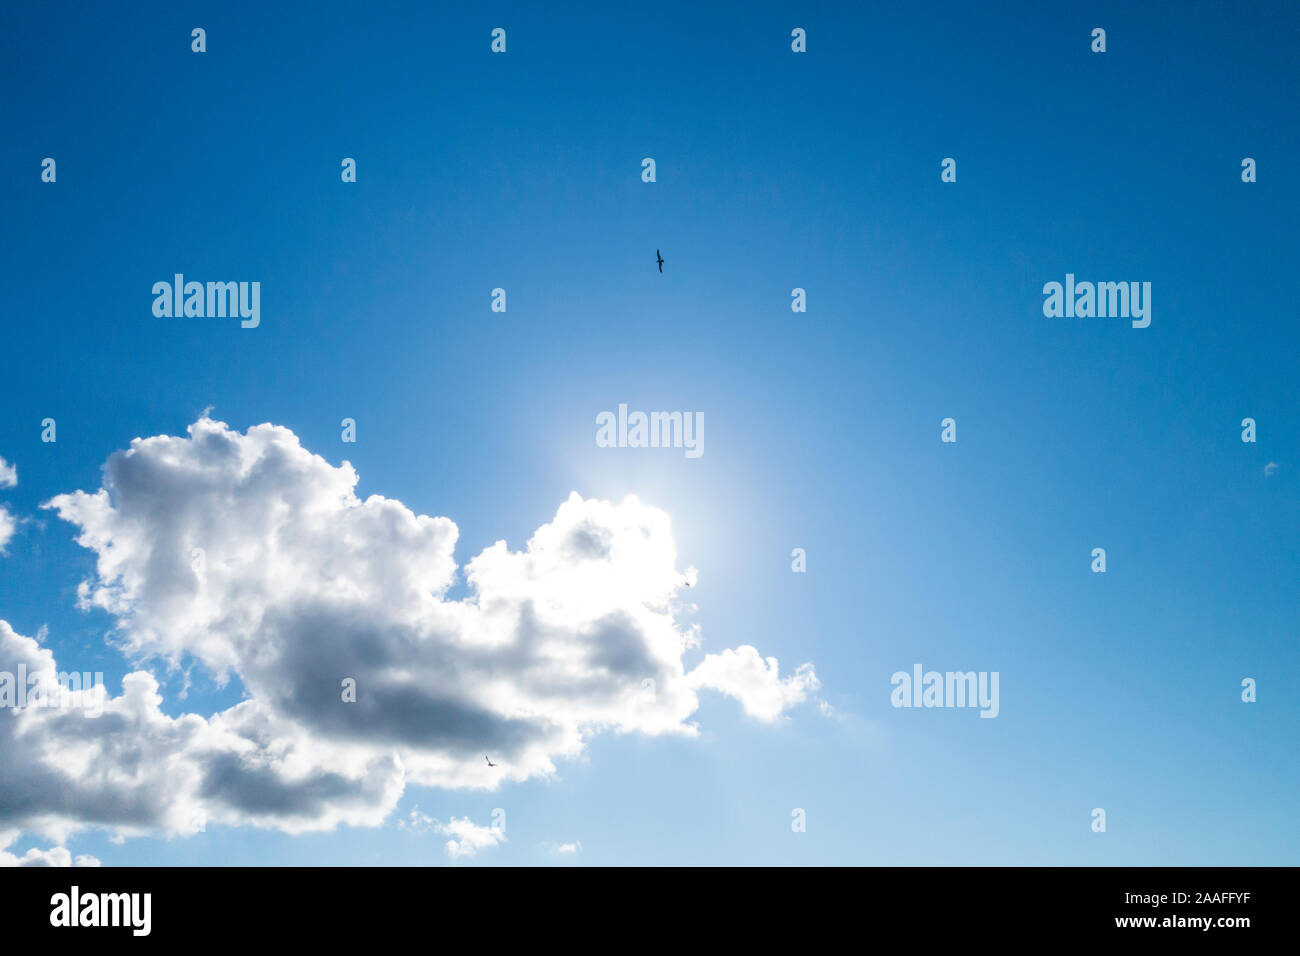 Birds circling overhead in a mostly blue sky with a few white puffy clouds. Stock Photo